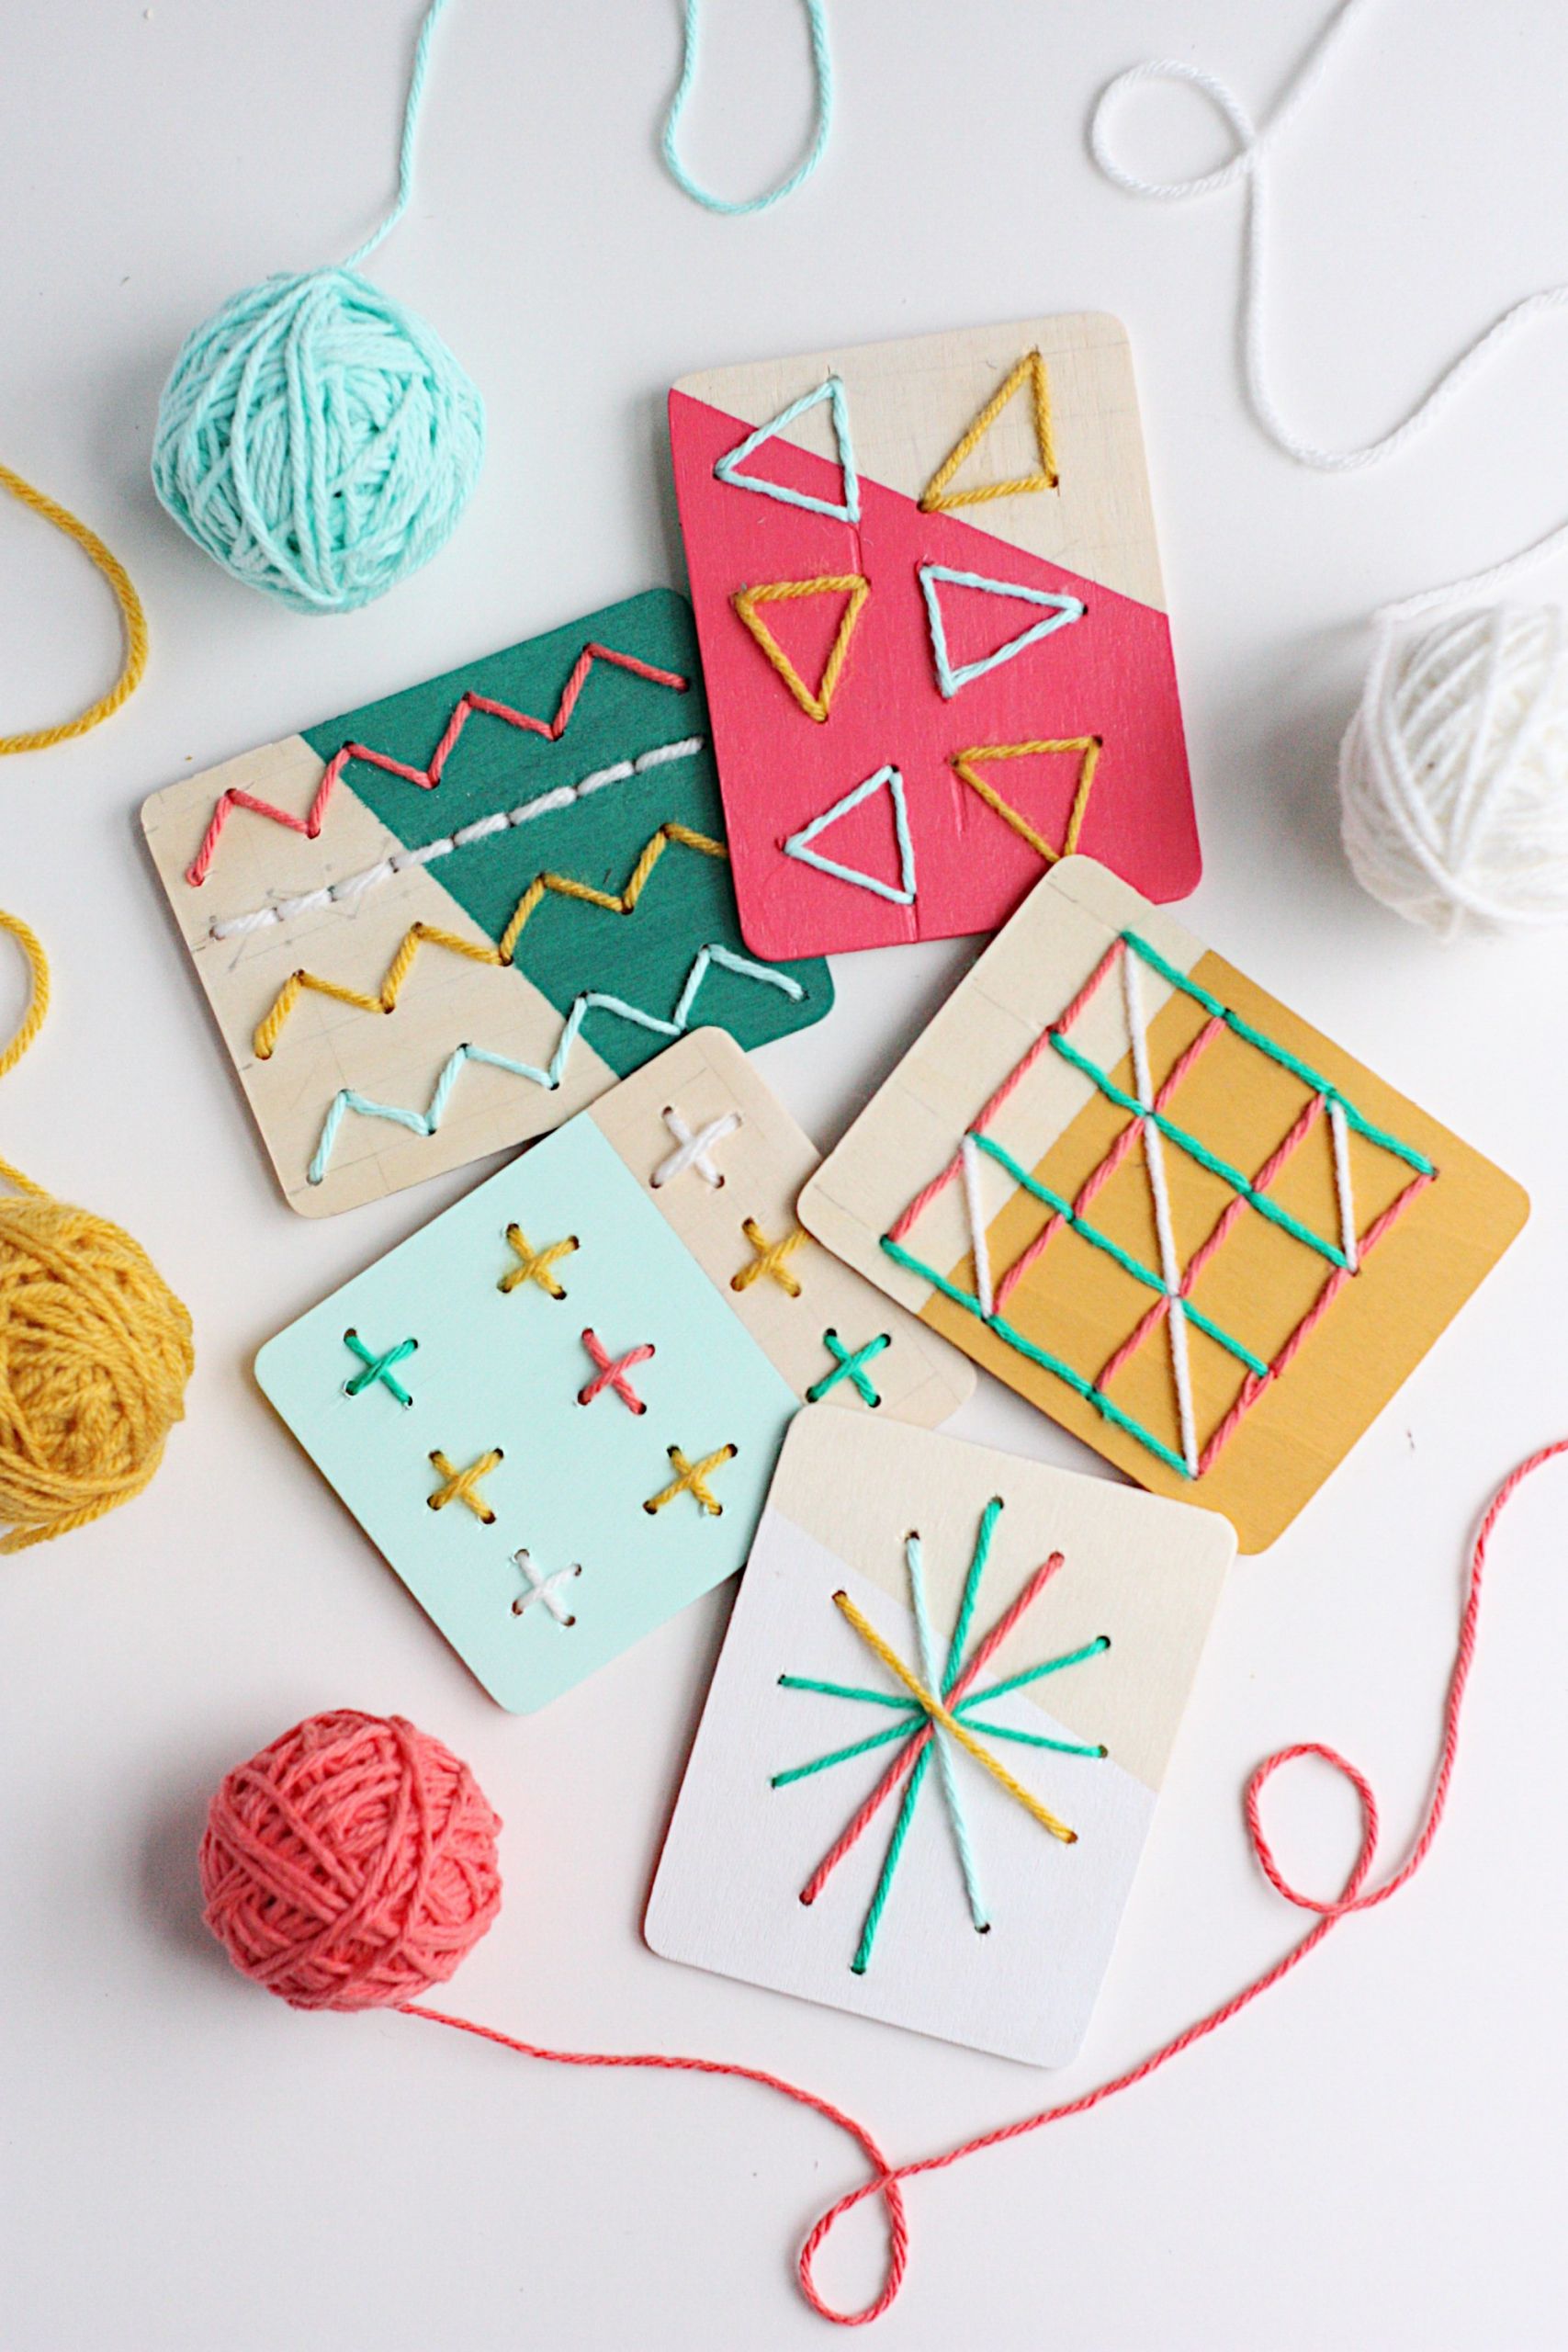 DIY Craft Projects For Kids
 11 DIY Yarn Crafts That Will Amaze Your Kids Shelterness